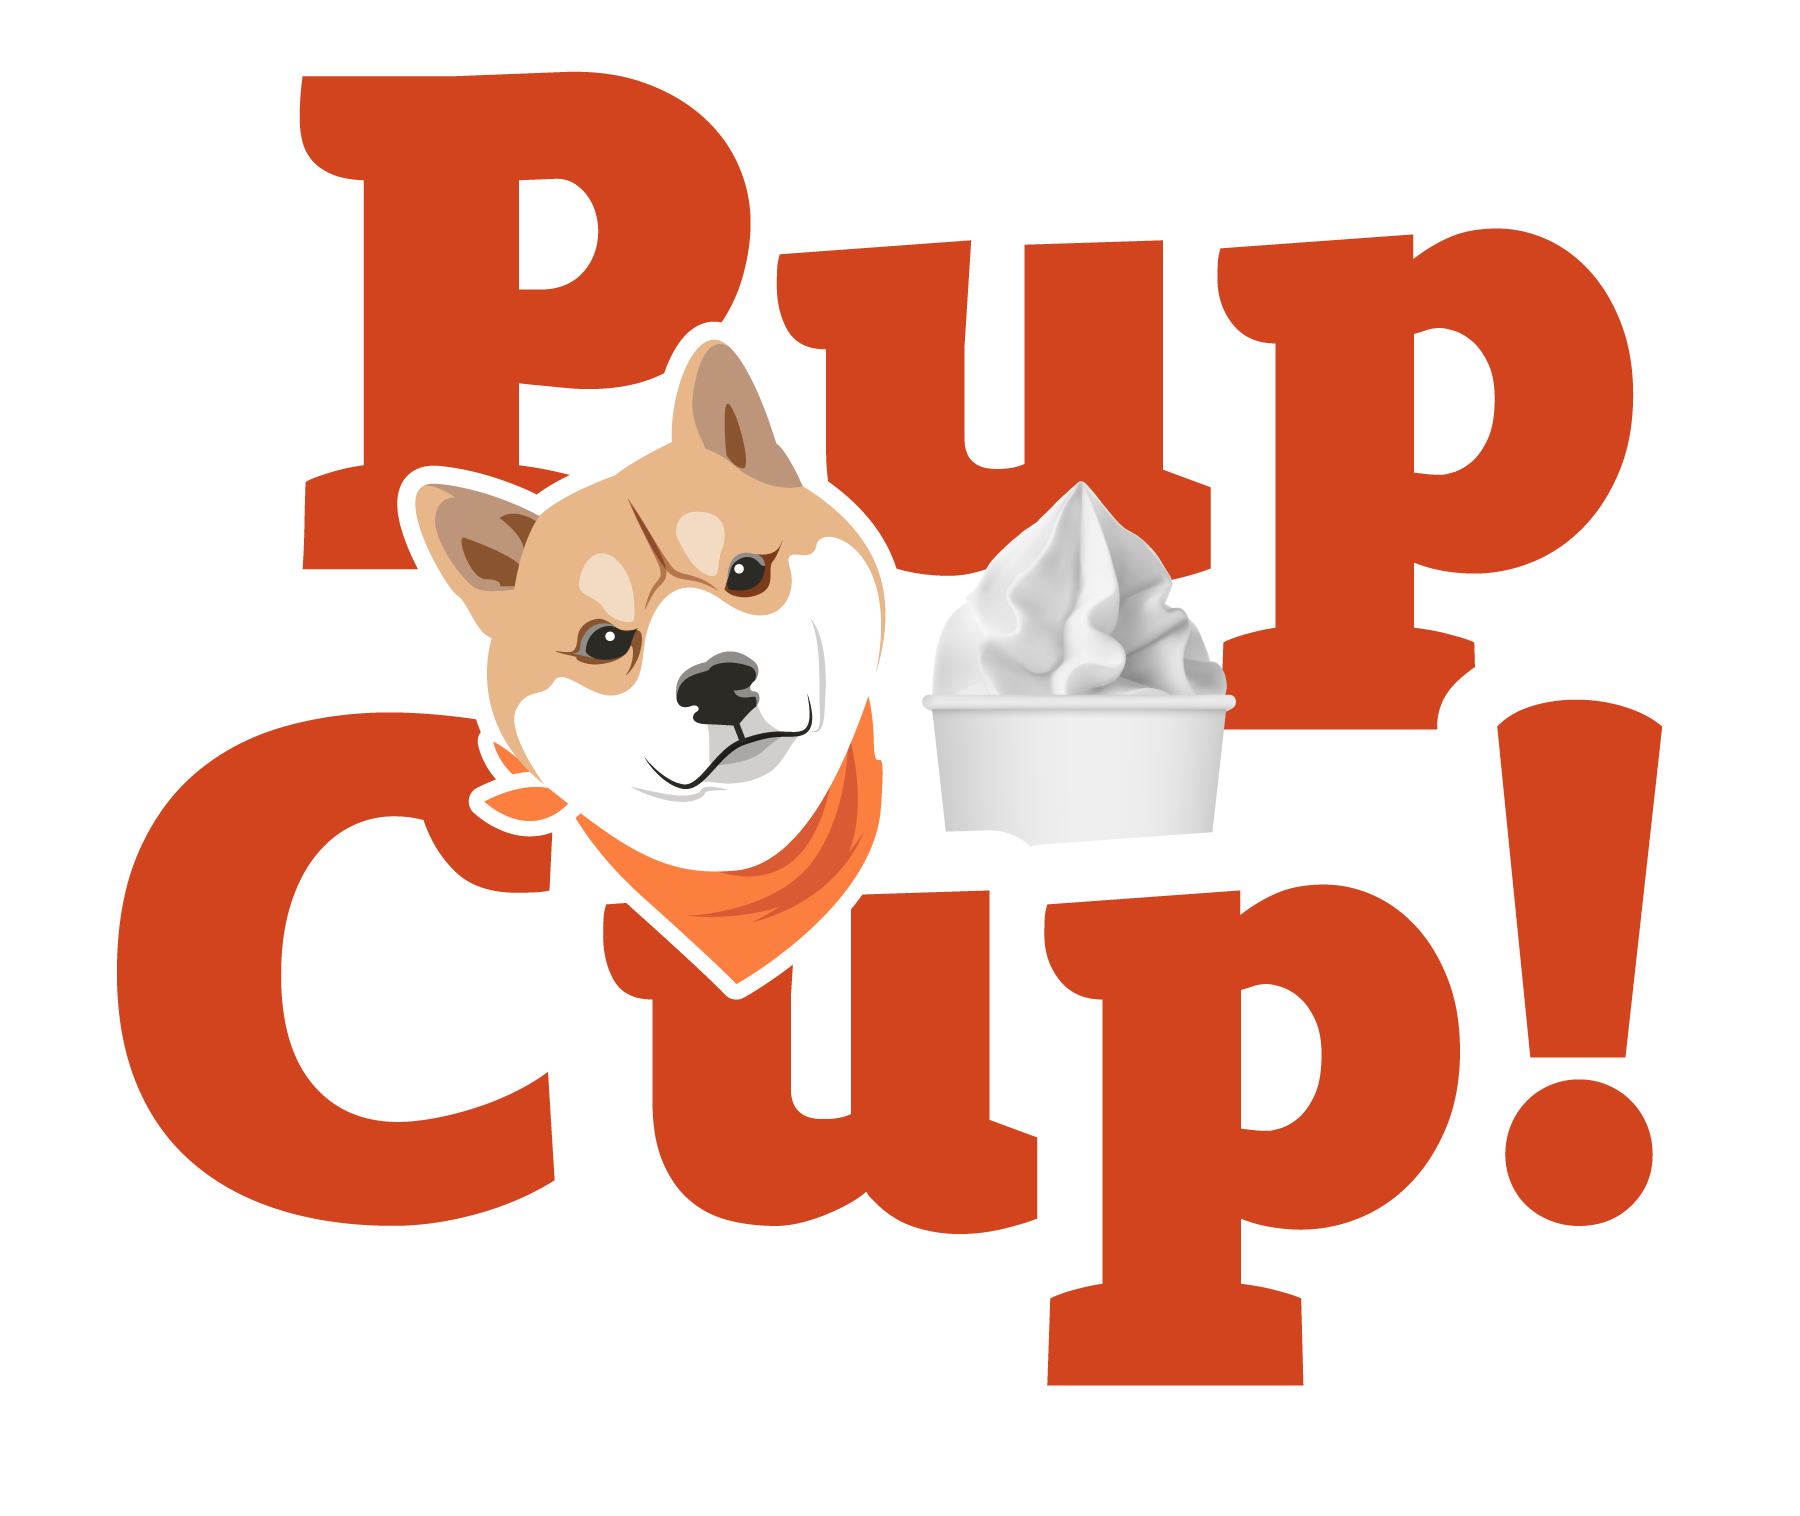 Pup Cup Frozen All Life Stage Dog Treat - Original